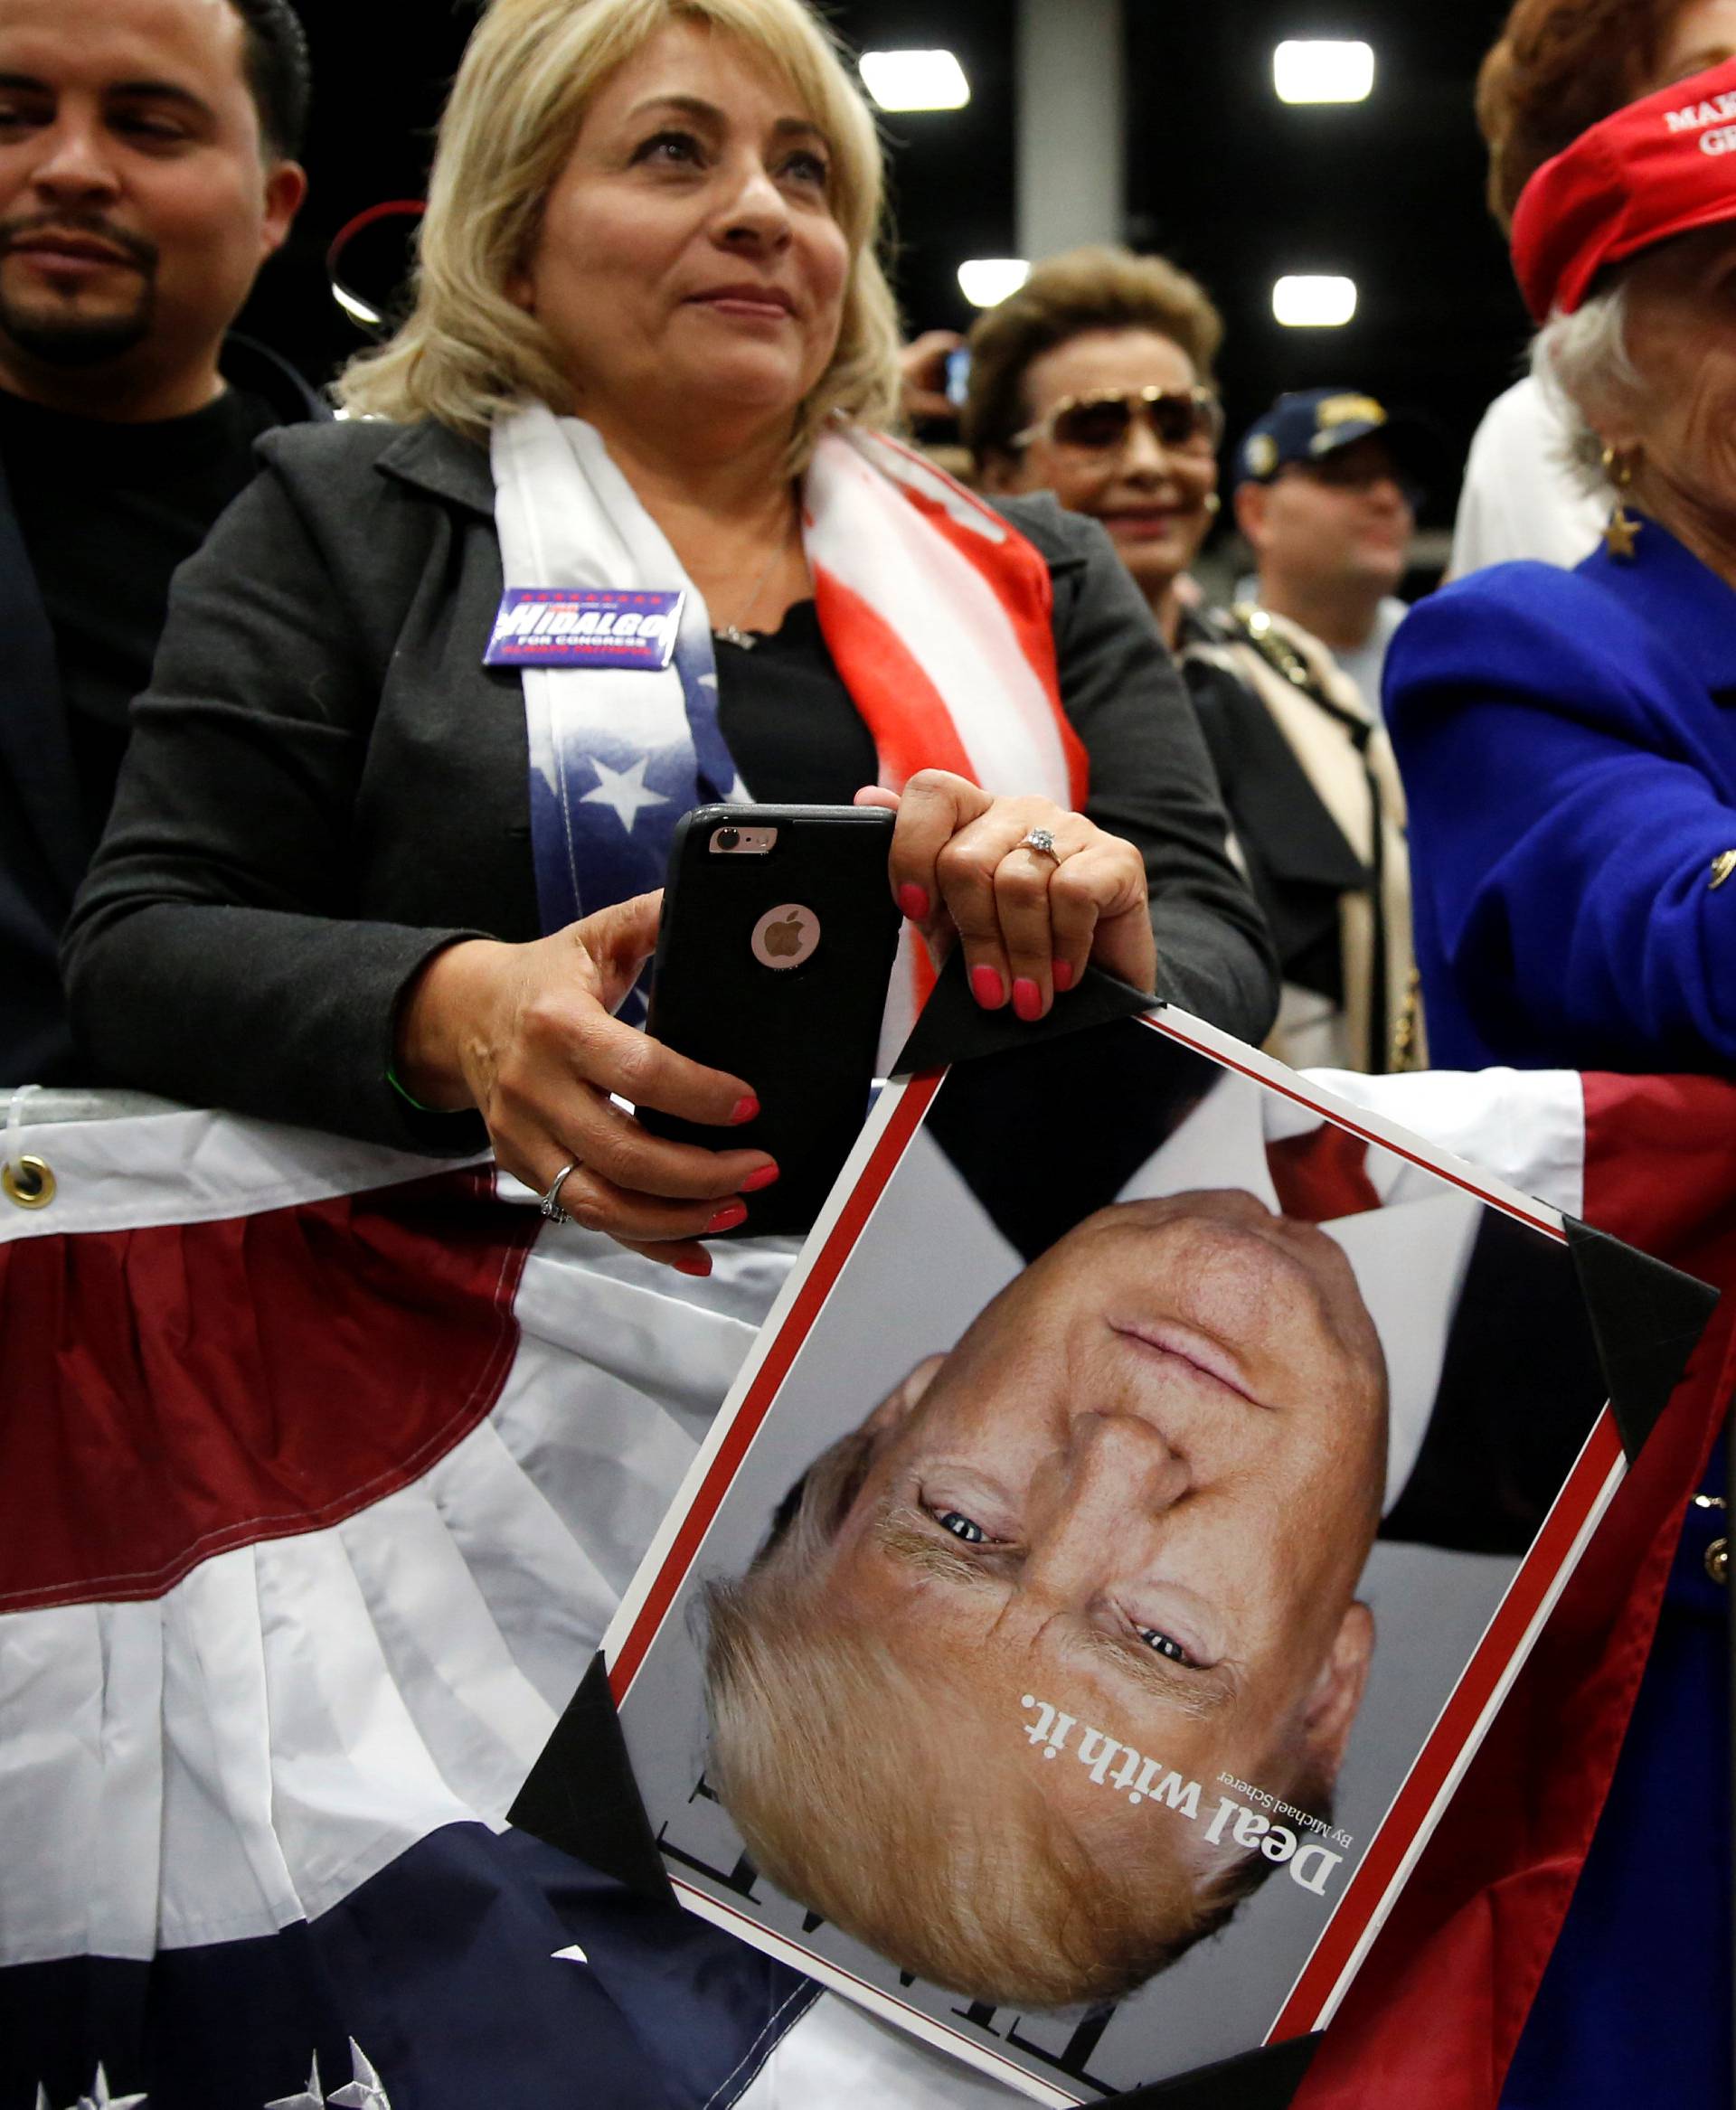 Supporters attend a rally with Republican U.S. presidential candidate Donald Trump in San Diego